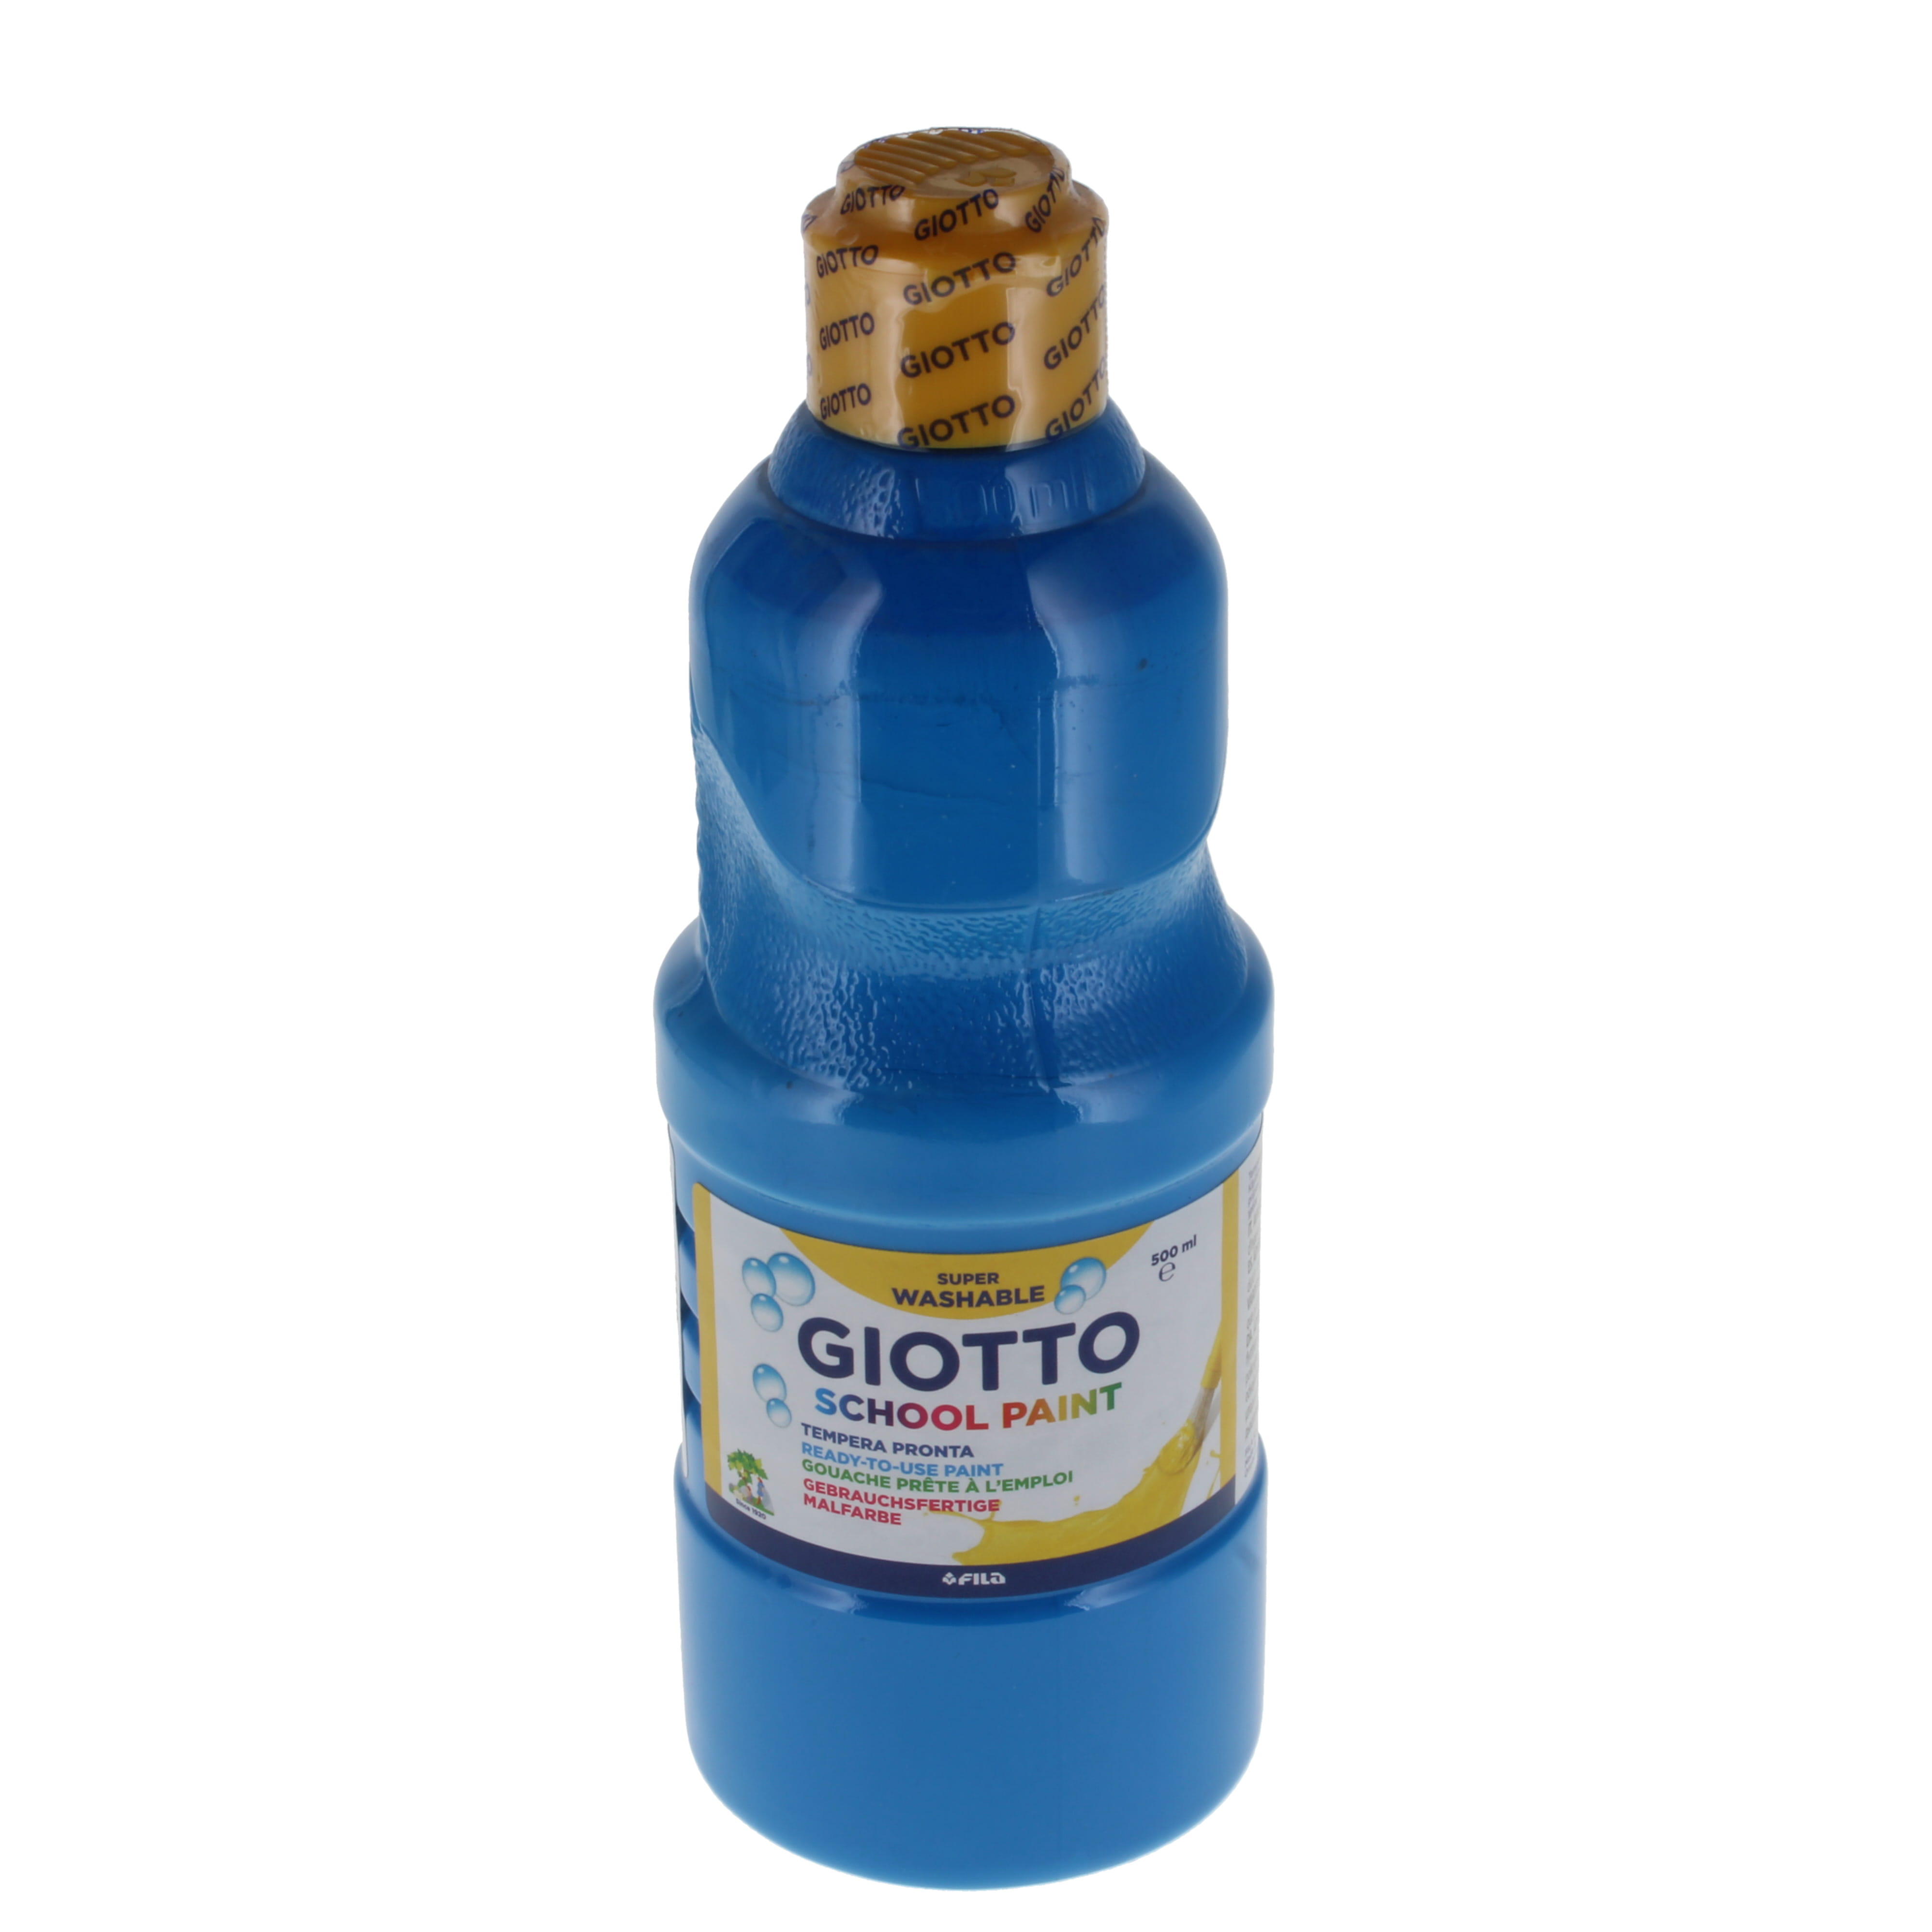 Giotto Washable Paint Cyan Blue - 500ml